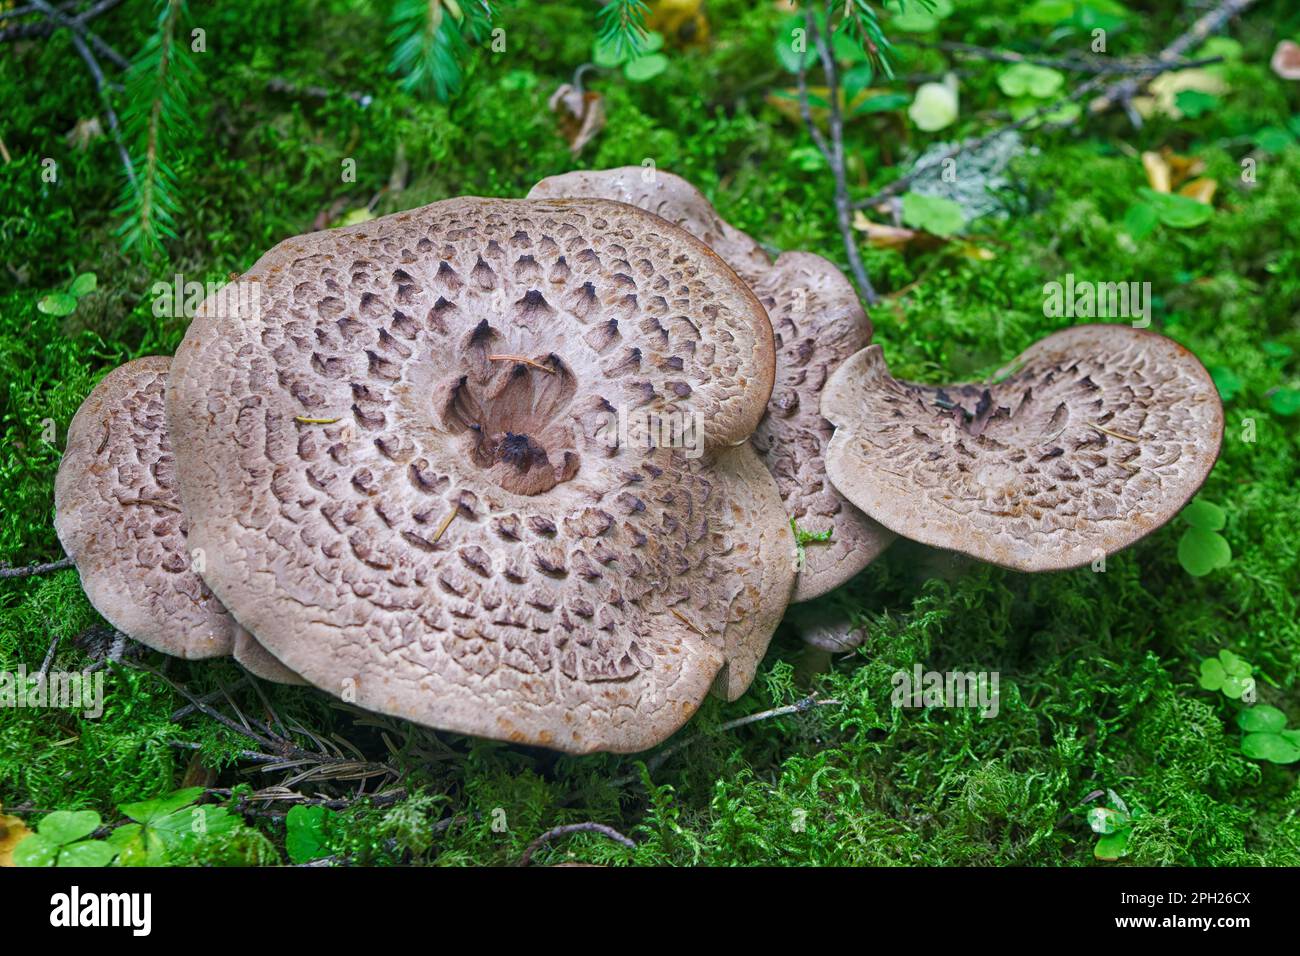 Sarcodon imbricatus, known as the shingled hedgehog, scaly hedgehog or Scaly Tooth close-up. Stock Photo